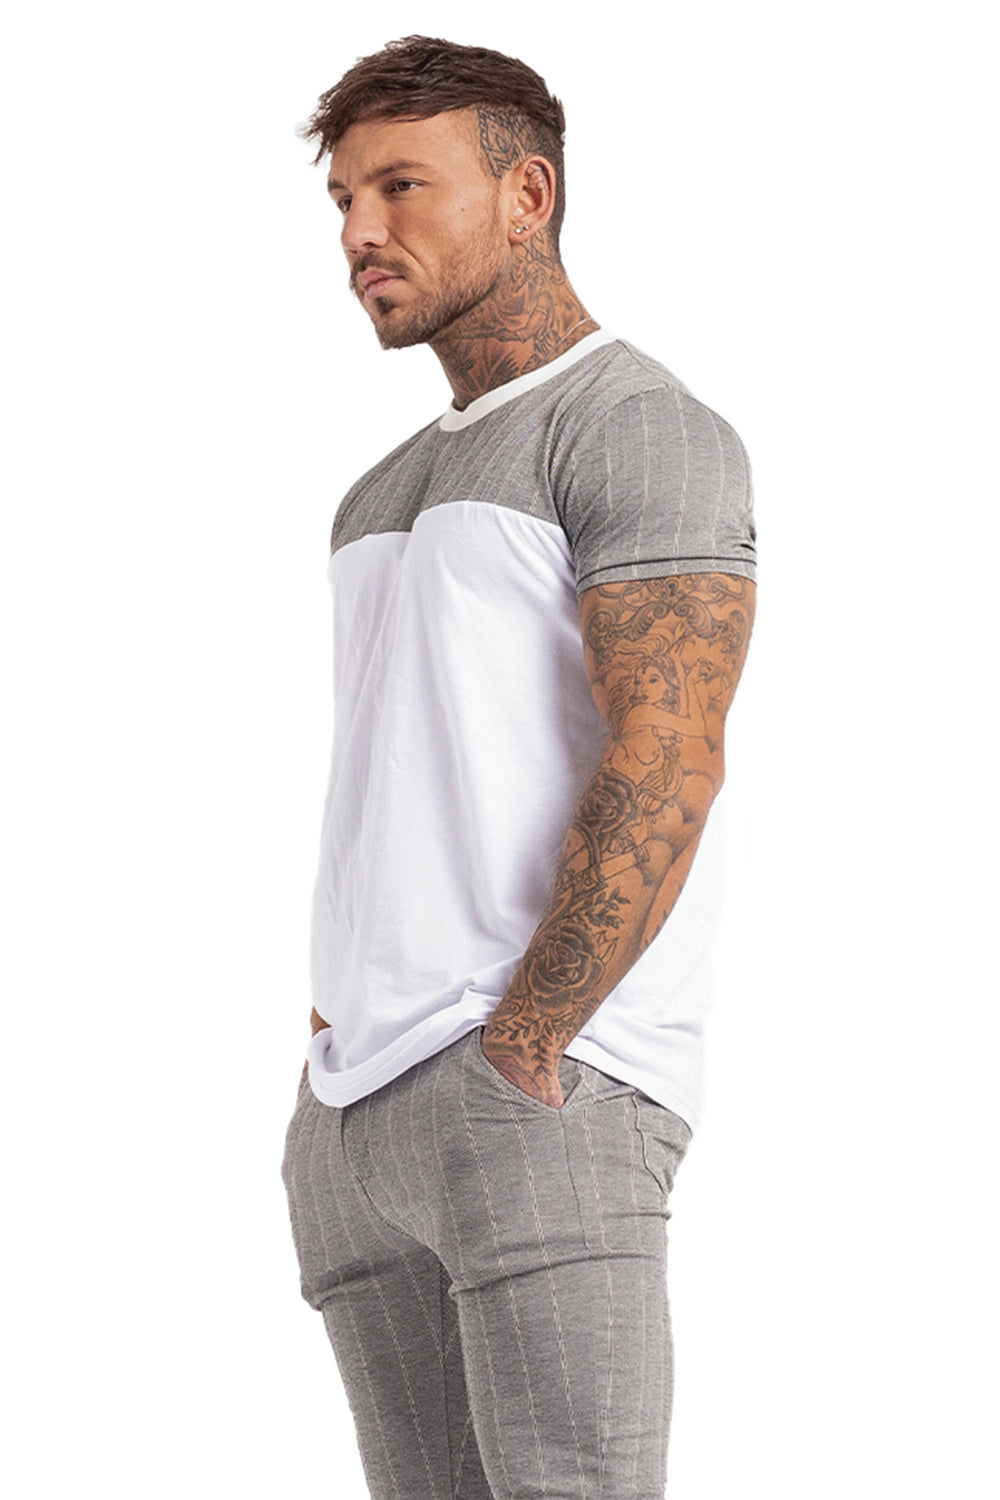 Men's spring casual sports suit